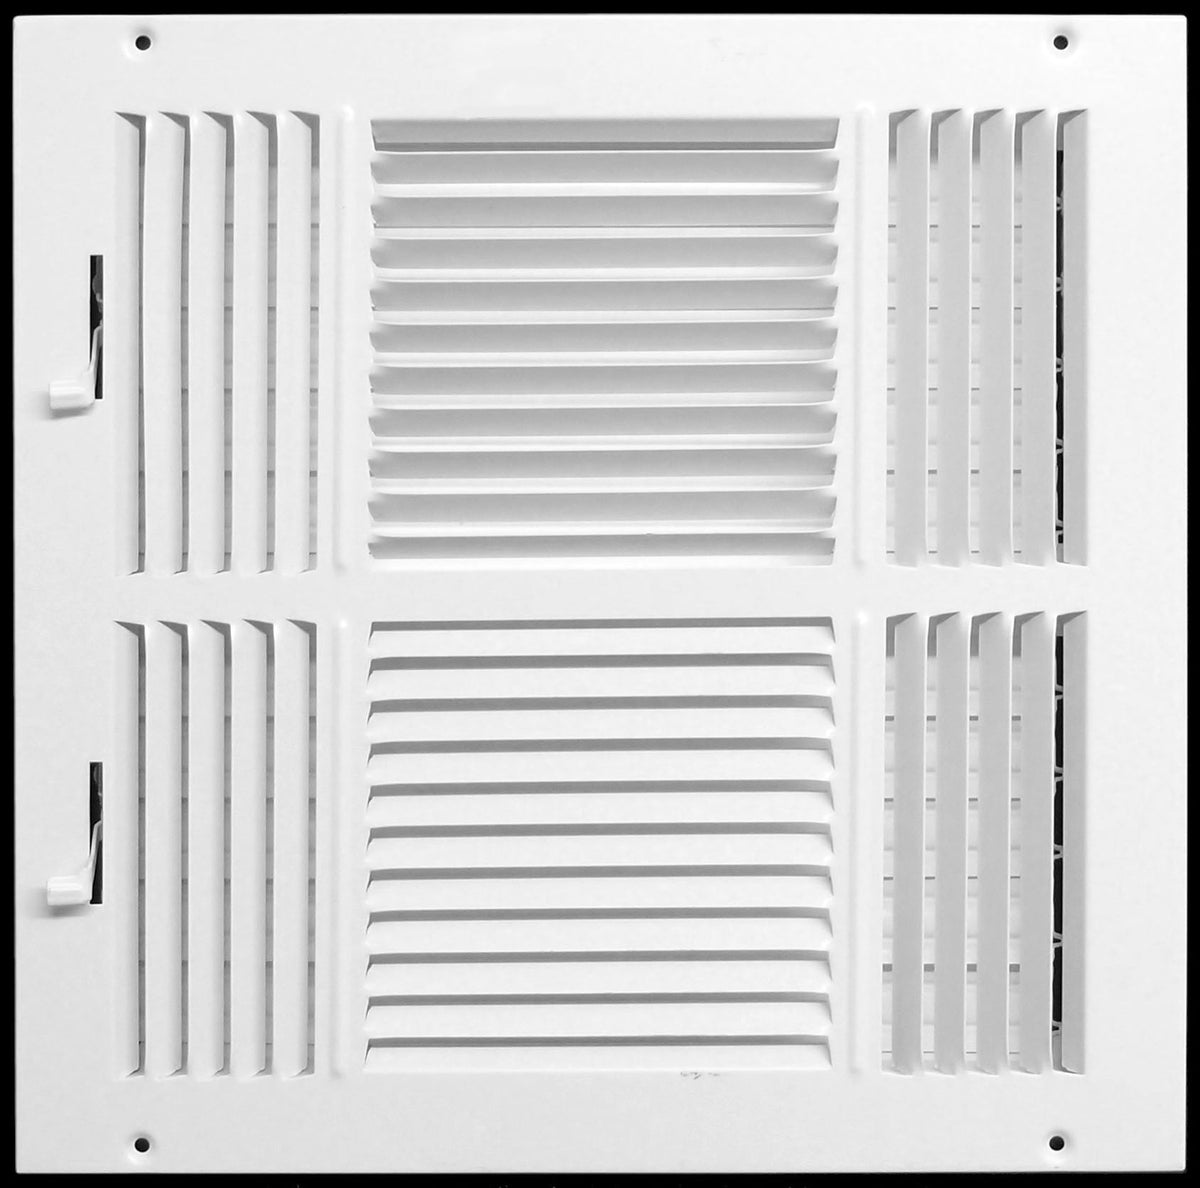 20&quot; X 20&quot; 4-Way AIR SUPPLY GRILLE - DUCT COVER &amp; DIFFUSER - Flat Stamped Face